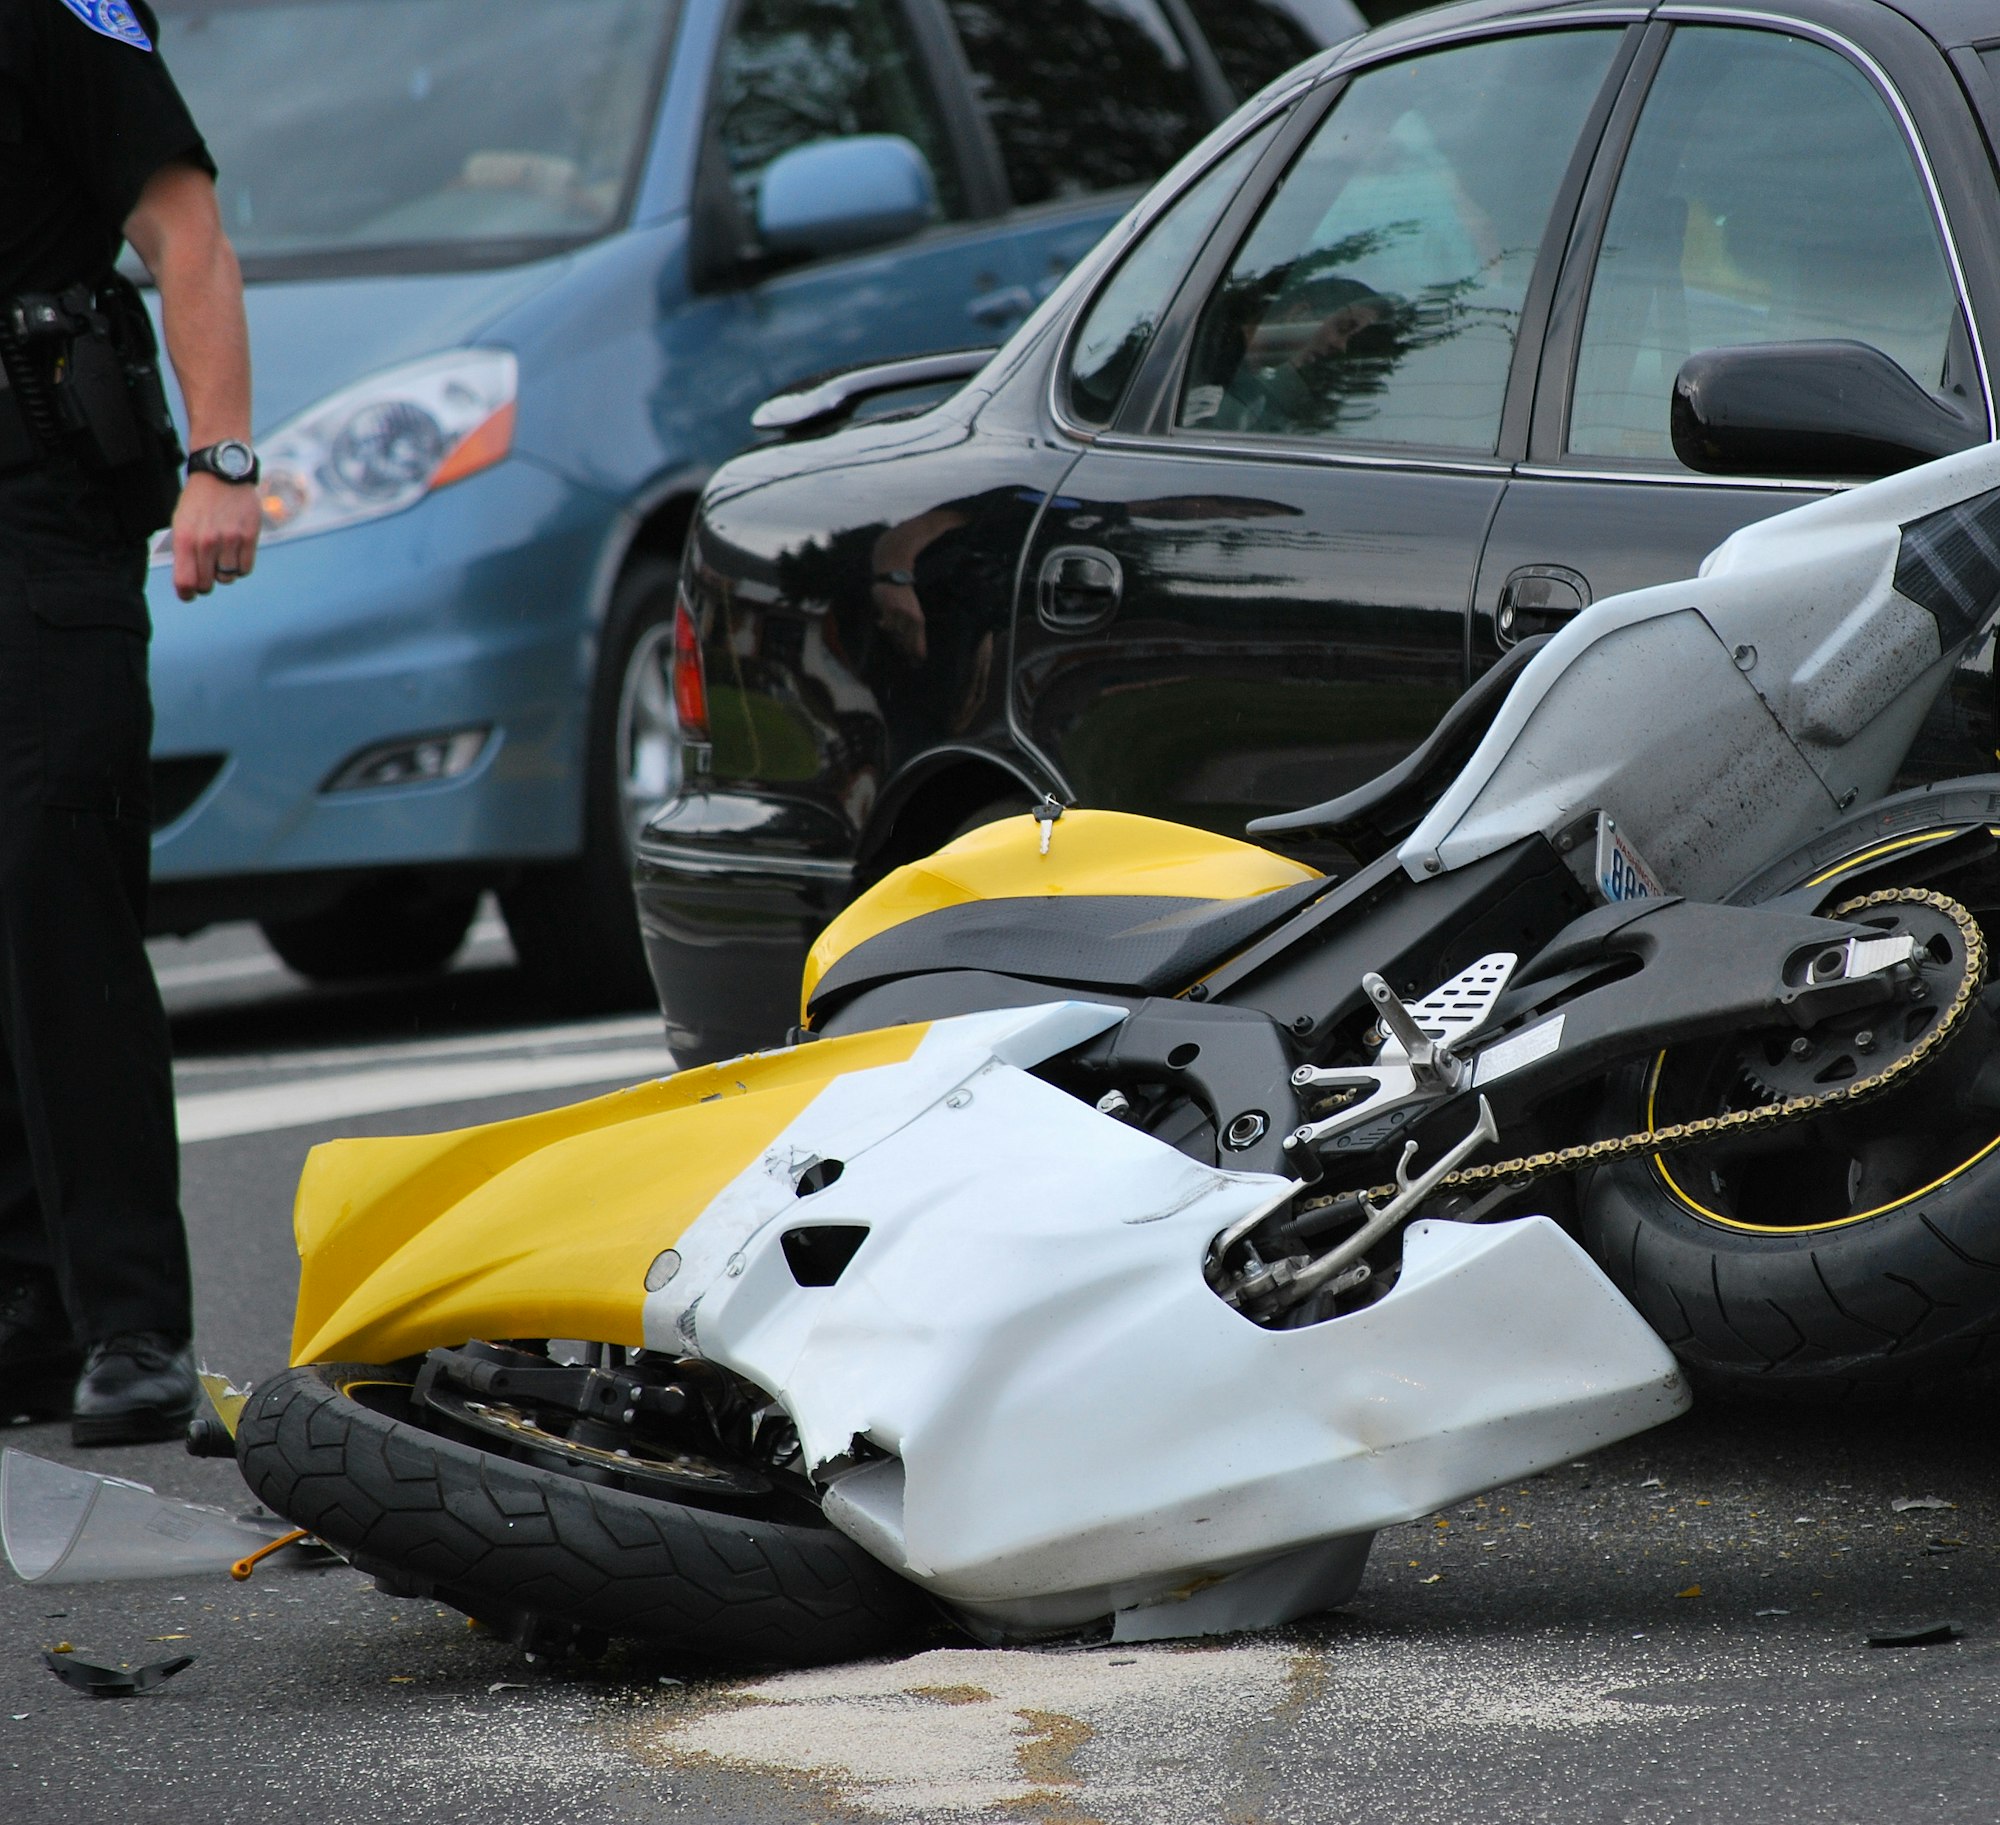 Yellow black motorcycle broken after an accident